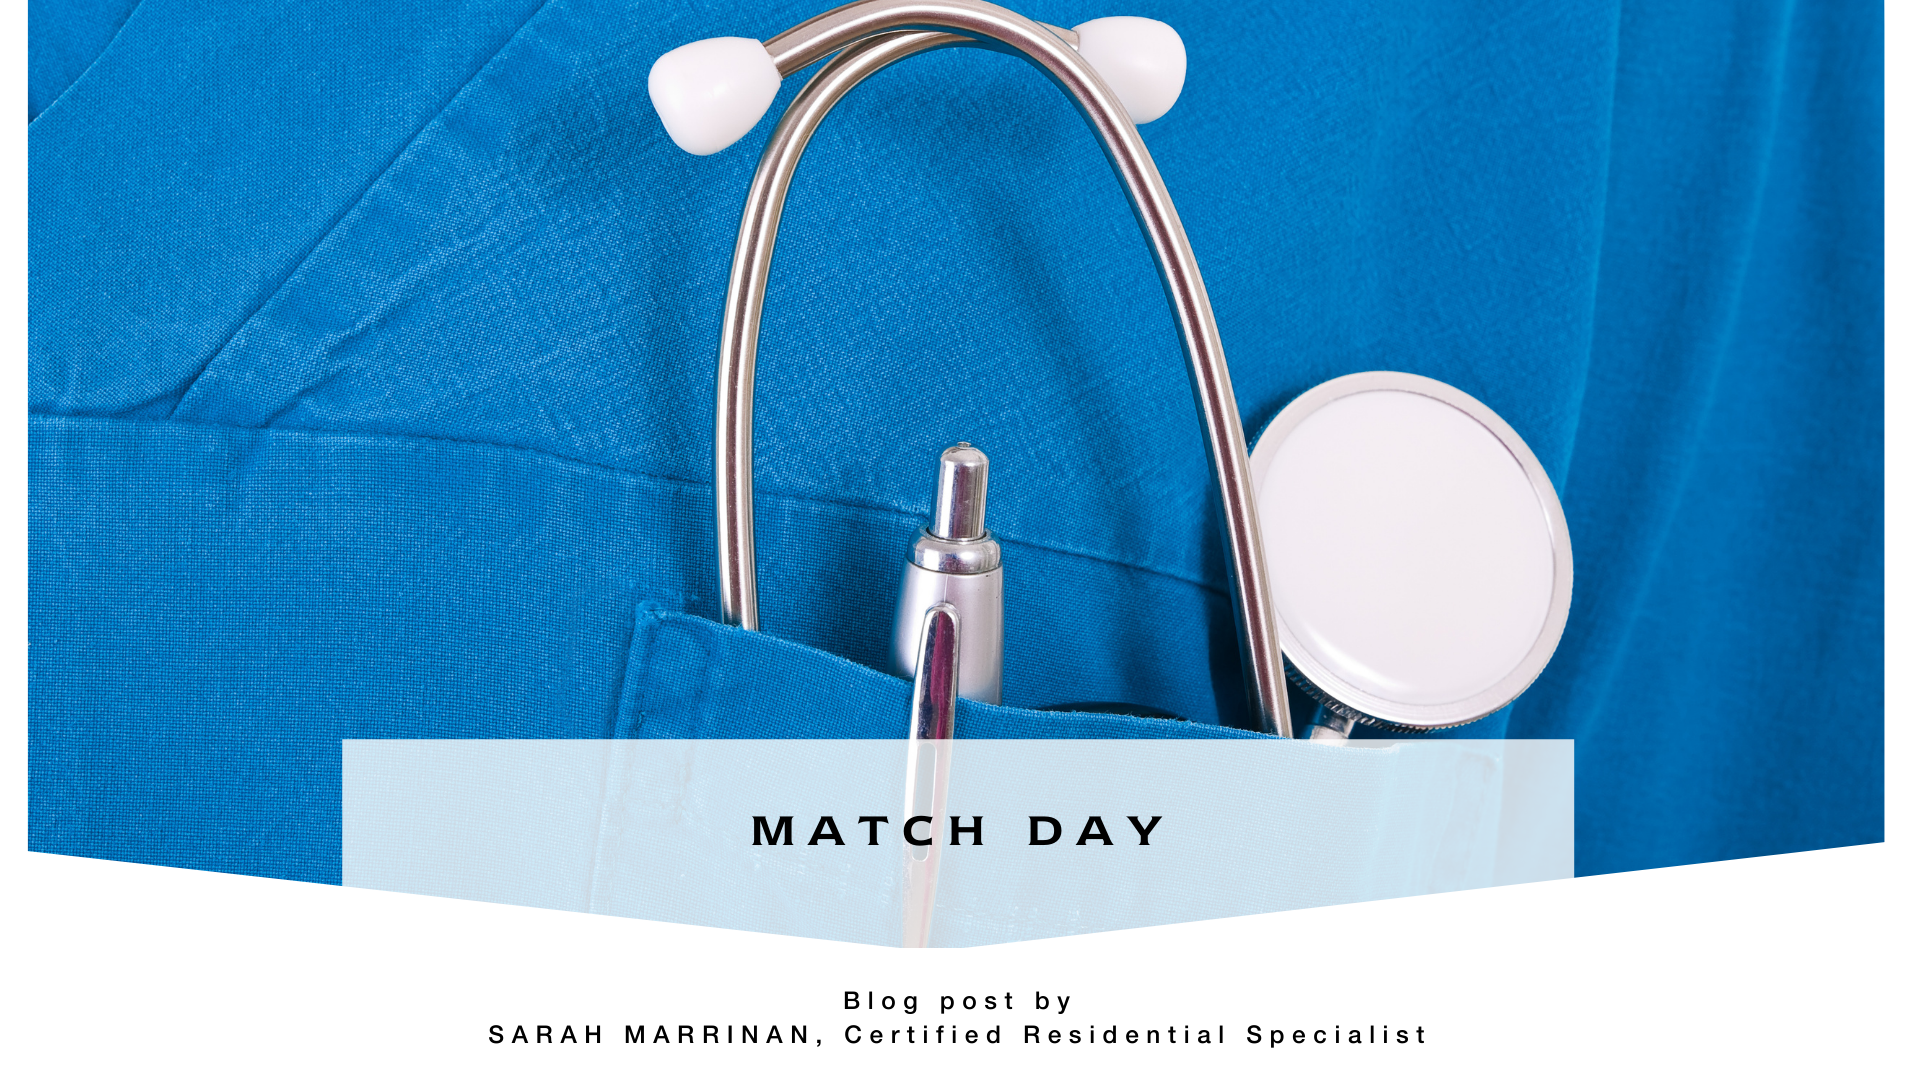 Medical Graduates are in Luck! Tomorrow is MATCH DAY!